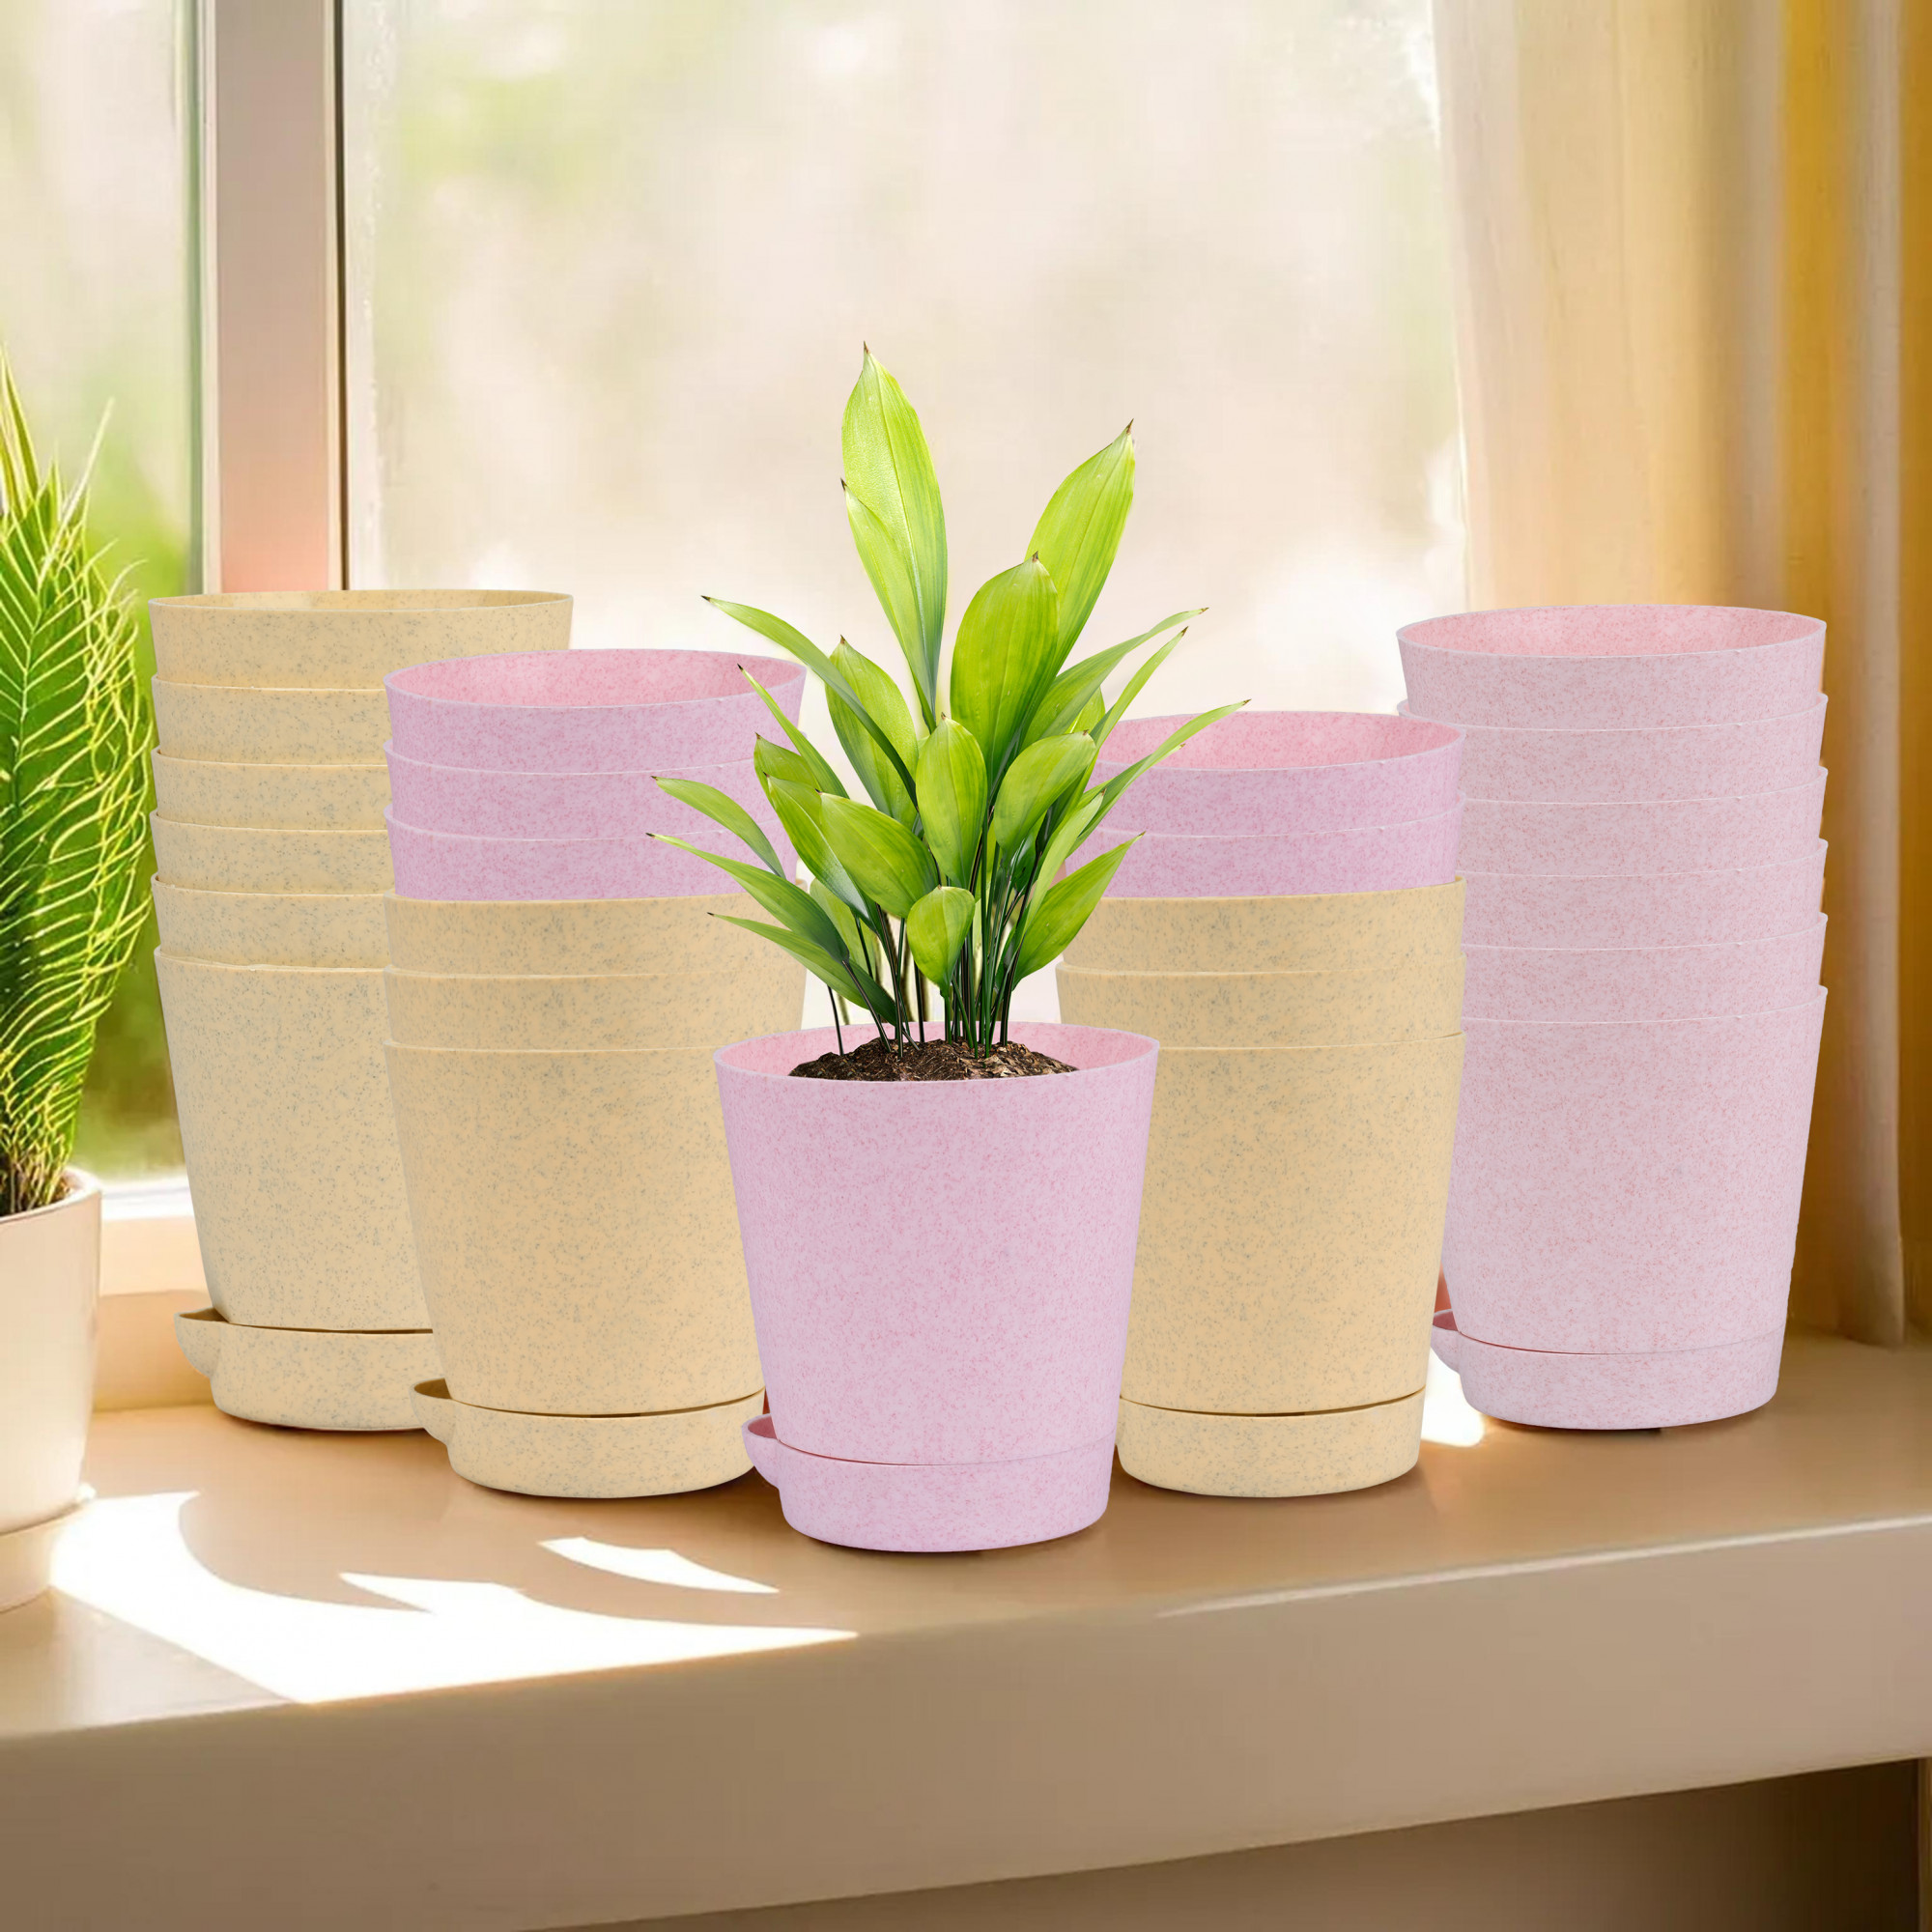 Kuber Industries Flower Pot | Flower Pot for Living Room-Office | Planters for Home-office-Lawns & Garden Décor | Self Watering Flower Planters Pots | Marble Titan | 4 Inch | Beige & Pink